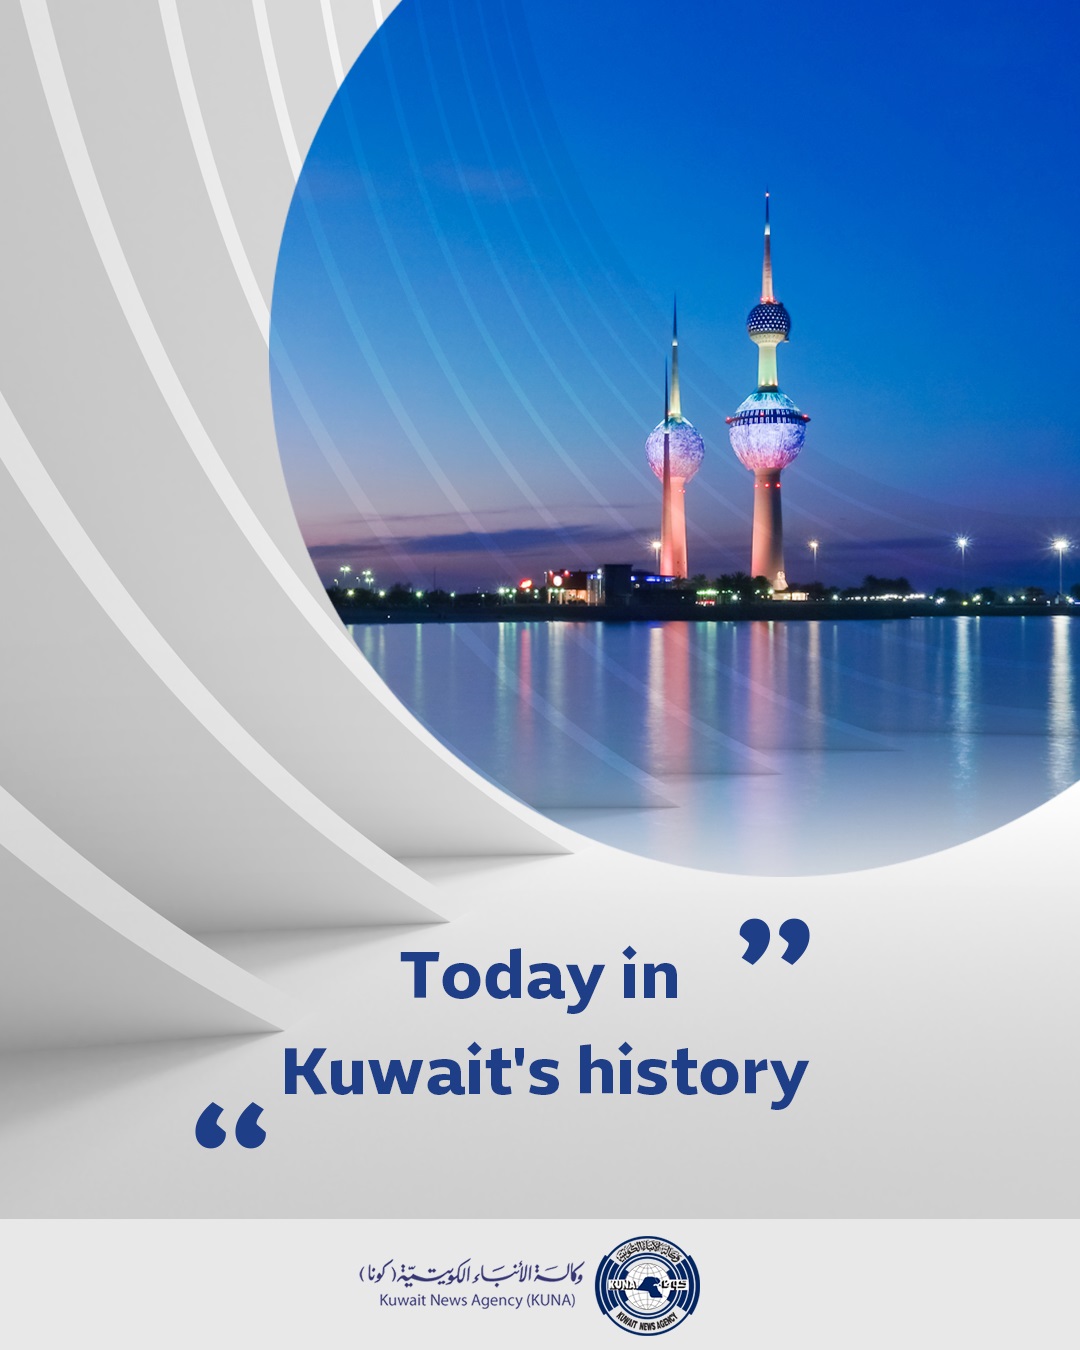 Today in Kuwait's history